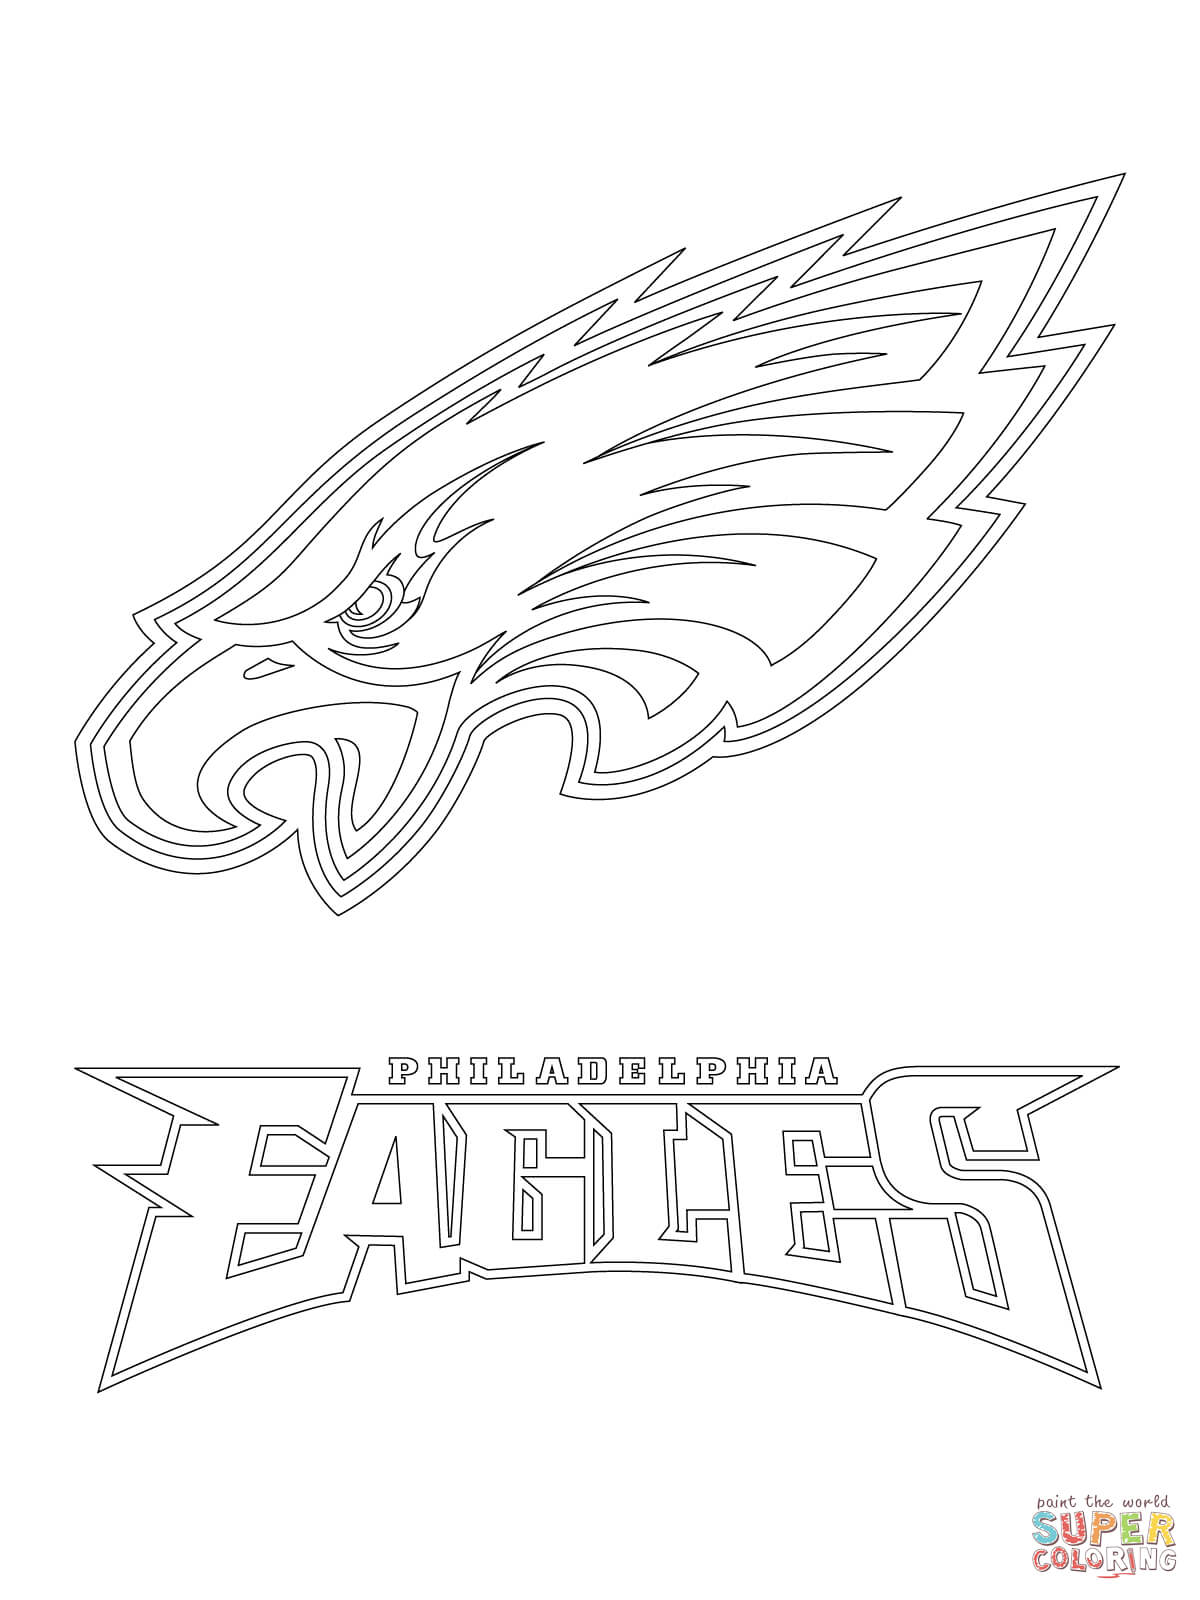 Philadelphia Eagles Logo coloring page | Free Printable Coloring Pages